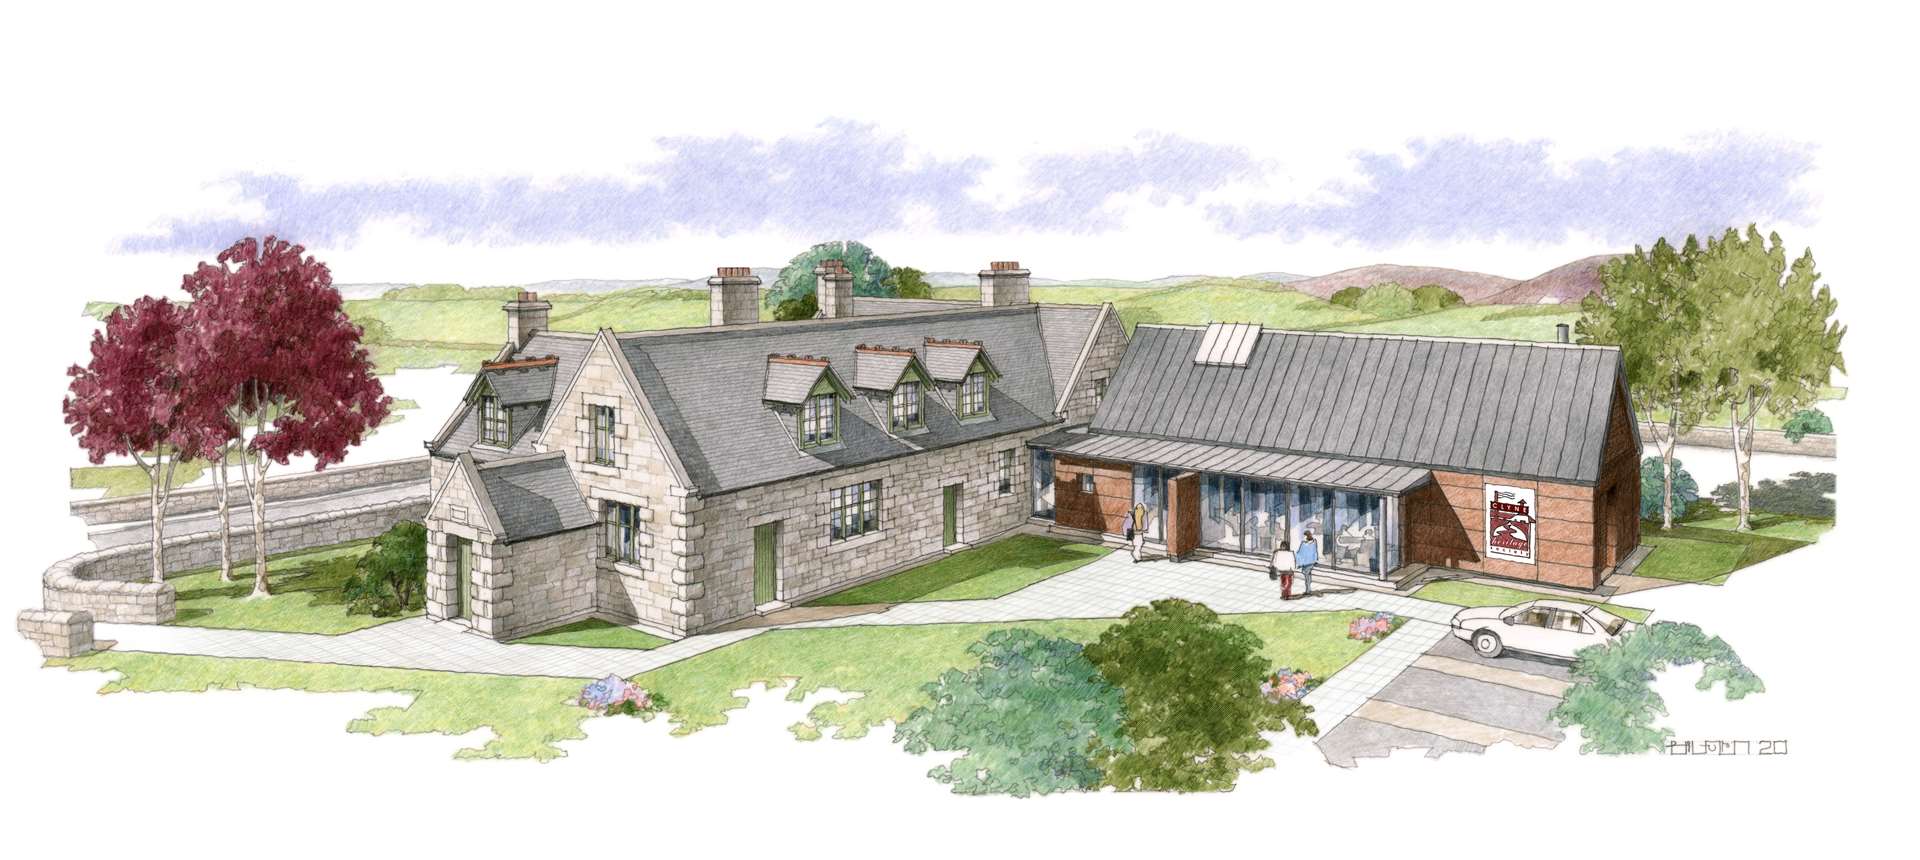 An artist's impression of the redeveloped Old Clyne School museum and heritage centre.